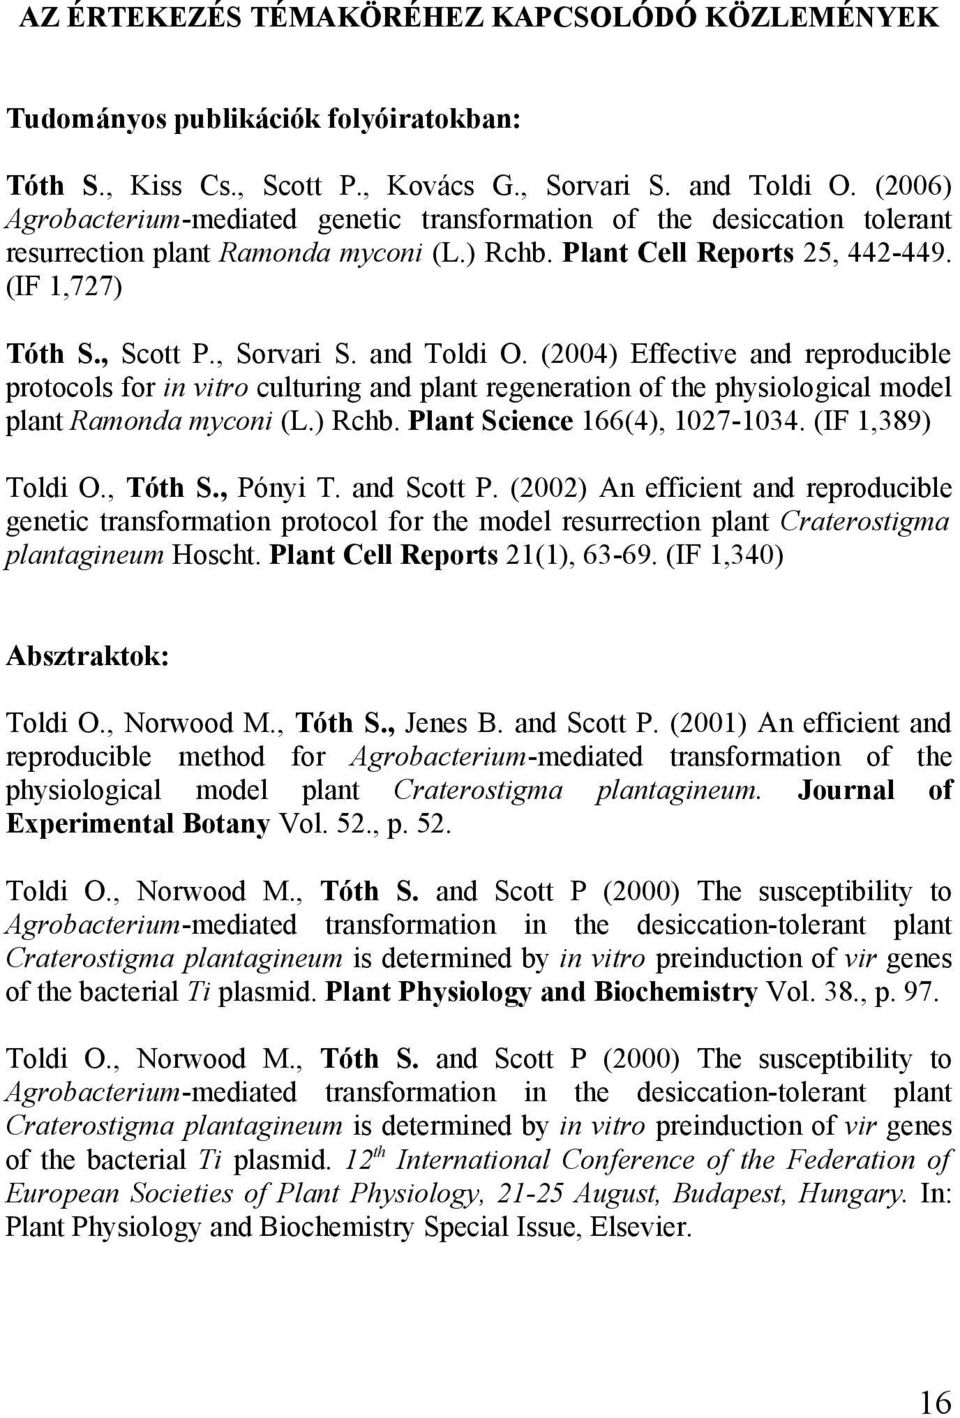 and Toldi O. (2004) Effective and reproducible protocols for in vitro culturing and plant regeneration of the physiological model plant Ramonda myconi (L.) Rchb. Plant Science 166(4), 1027-1034.